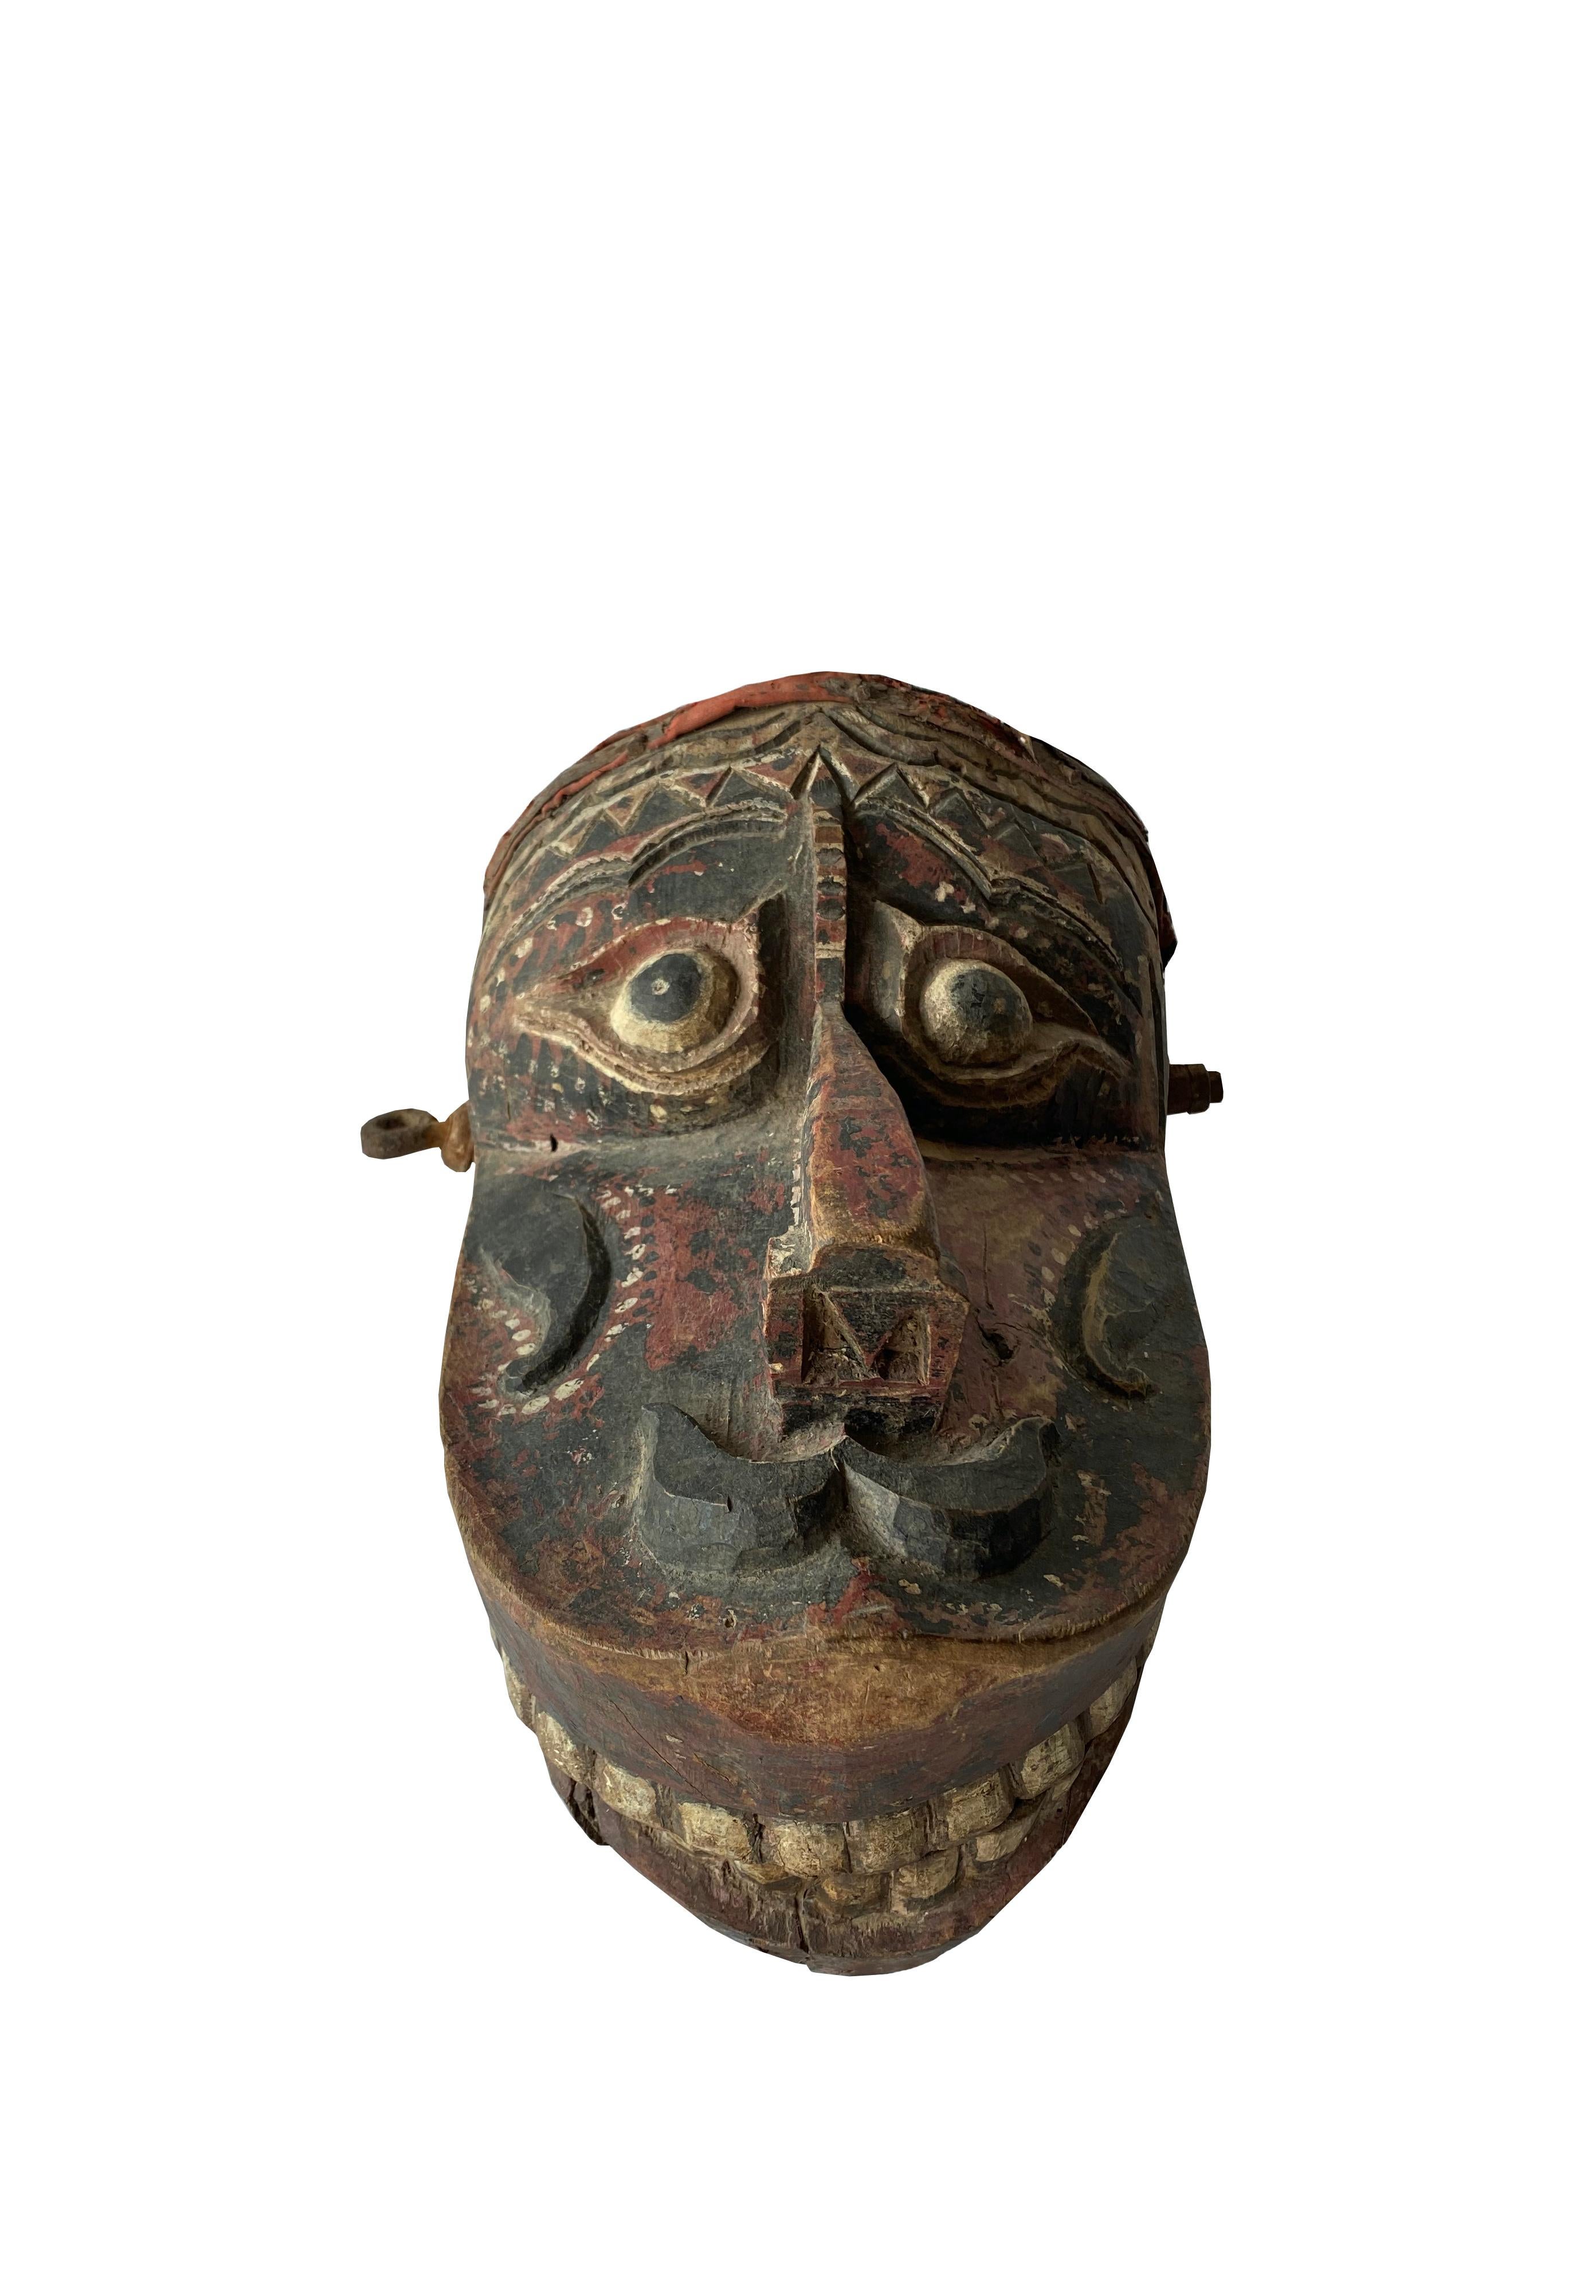 This mask from Java depicts a mythical creature which would have been used in ‘Wayang Topeng’ dance performances. It features handles which are used to open and close the creatures mouth and a mix of white, red and black polychrome. The mask also